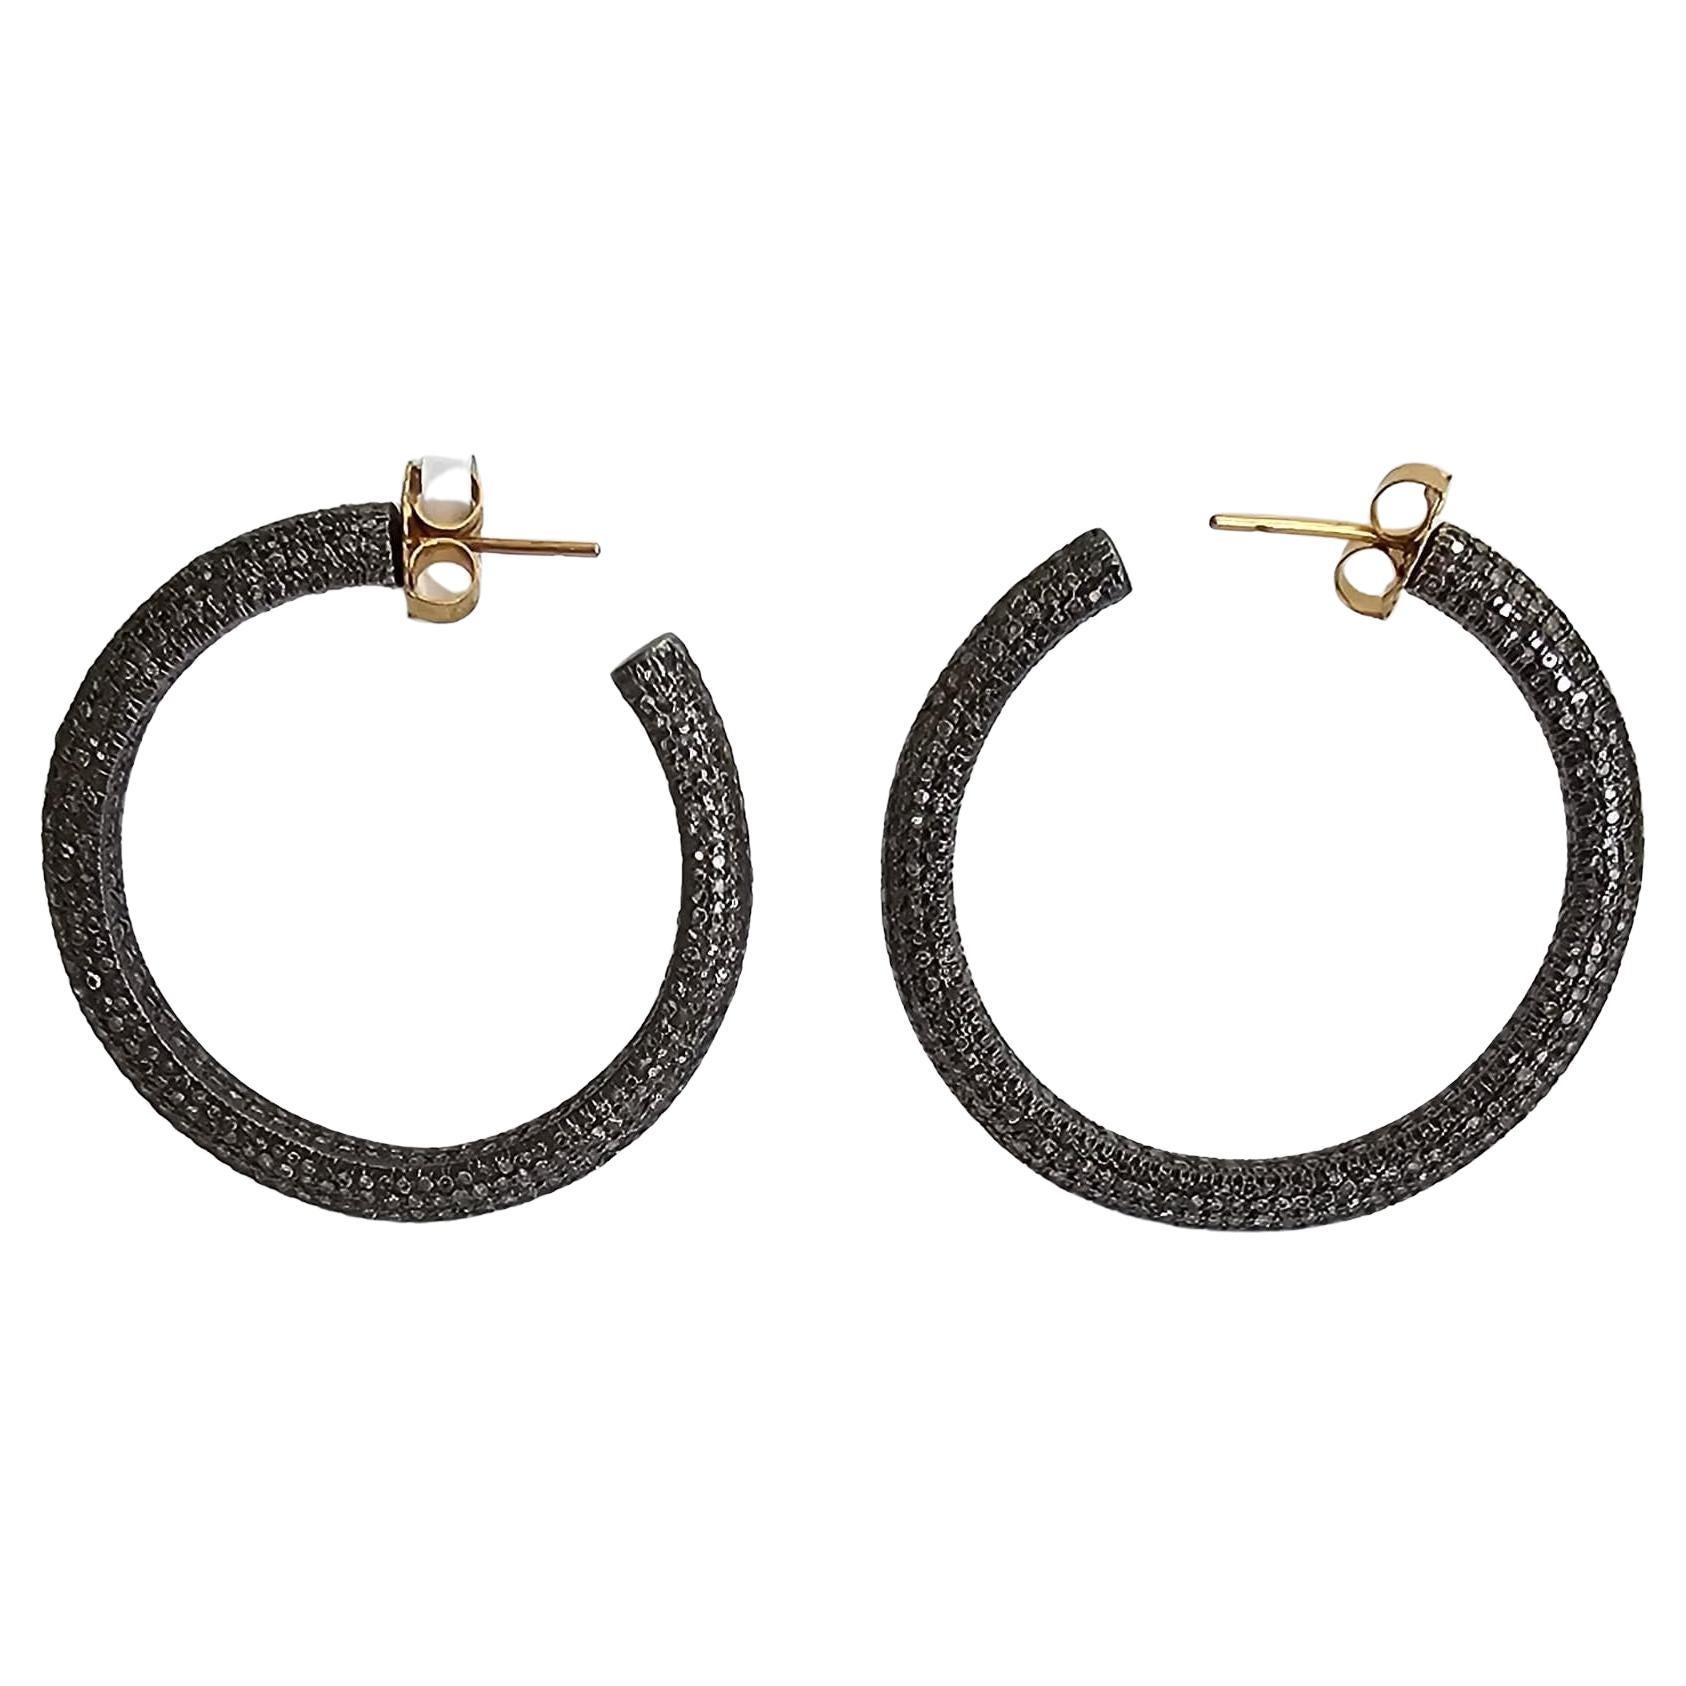 Pave Diamonds Hoop Earrings Made In 18k Yellow Gold & Silver For Sale